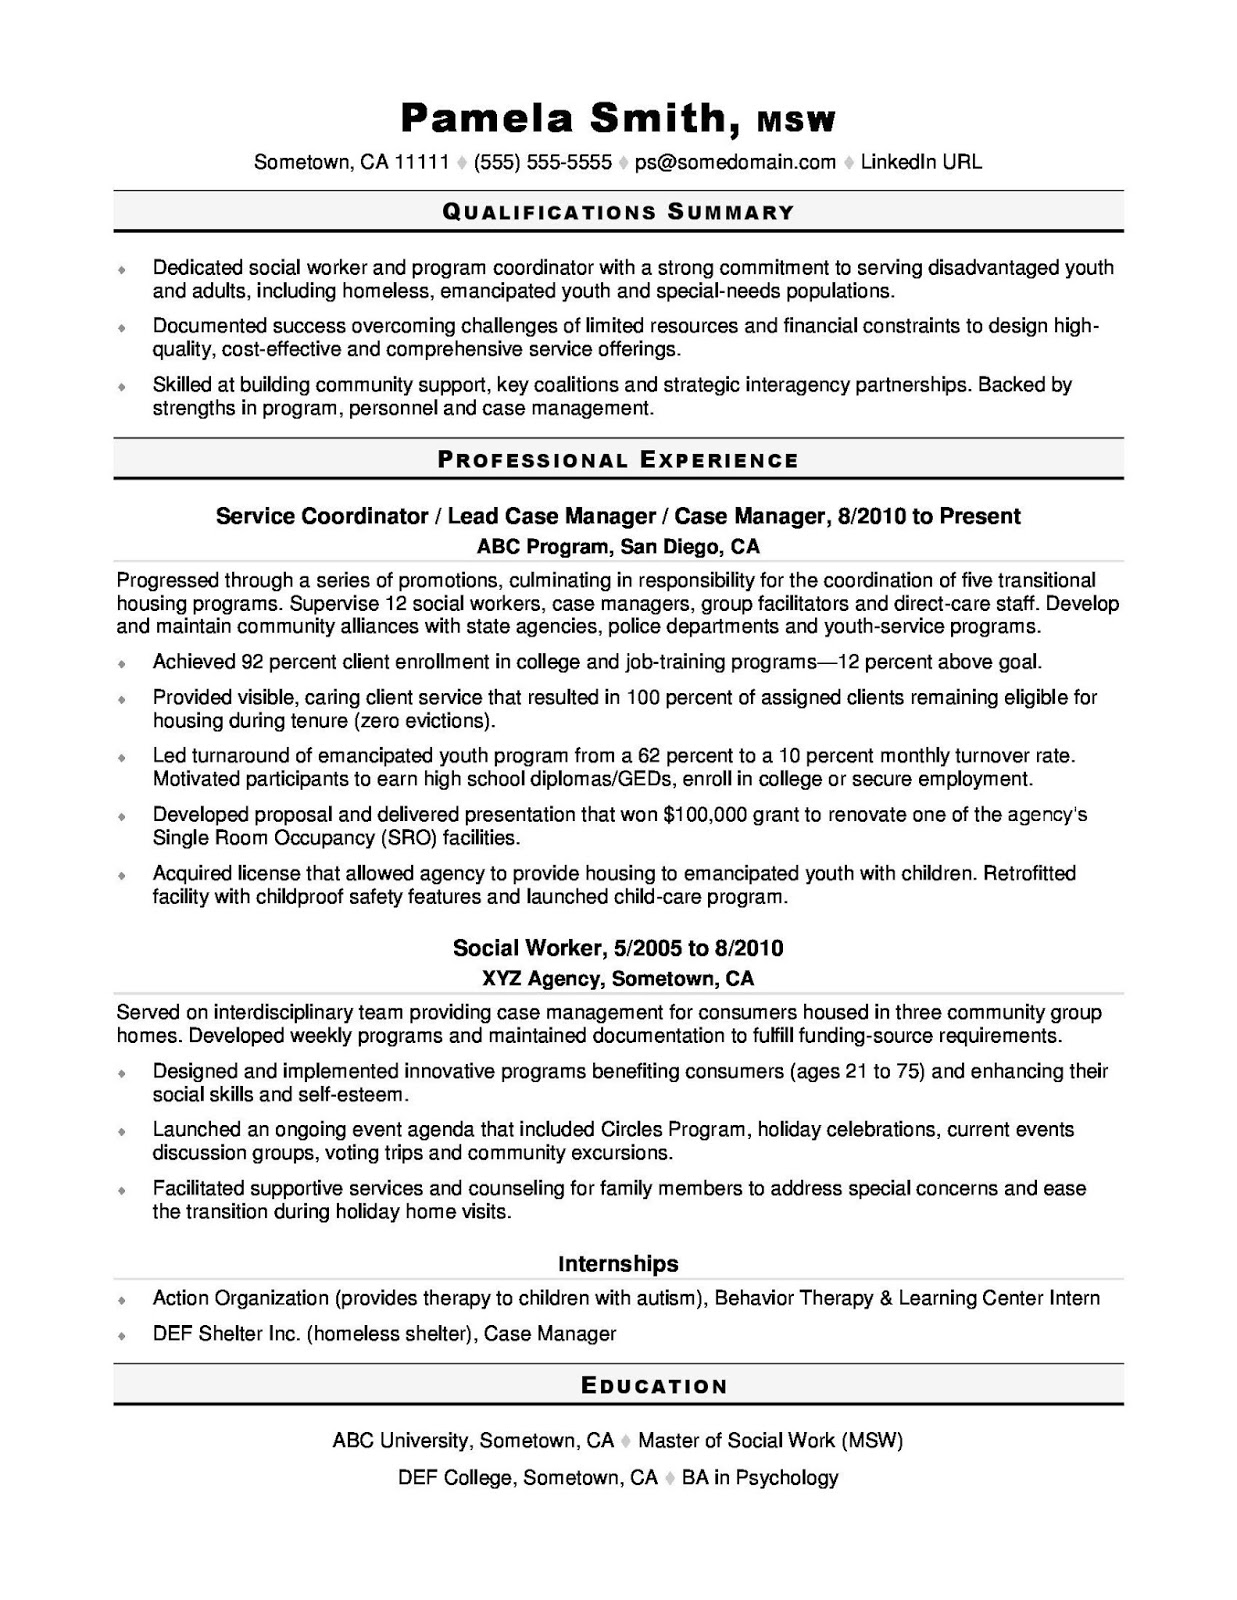 cosmetologist resume example, cosmetologist resume examples newly licensed, cosmetologist resume sample, cosmetologist skills resume example 2019, entry level cosmetologist resume examples 2020, resume example for a cosmetologist, cosmetology resume examples beginners,